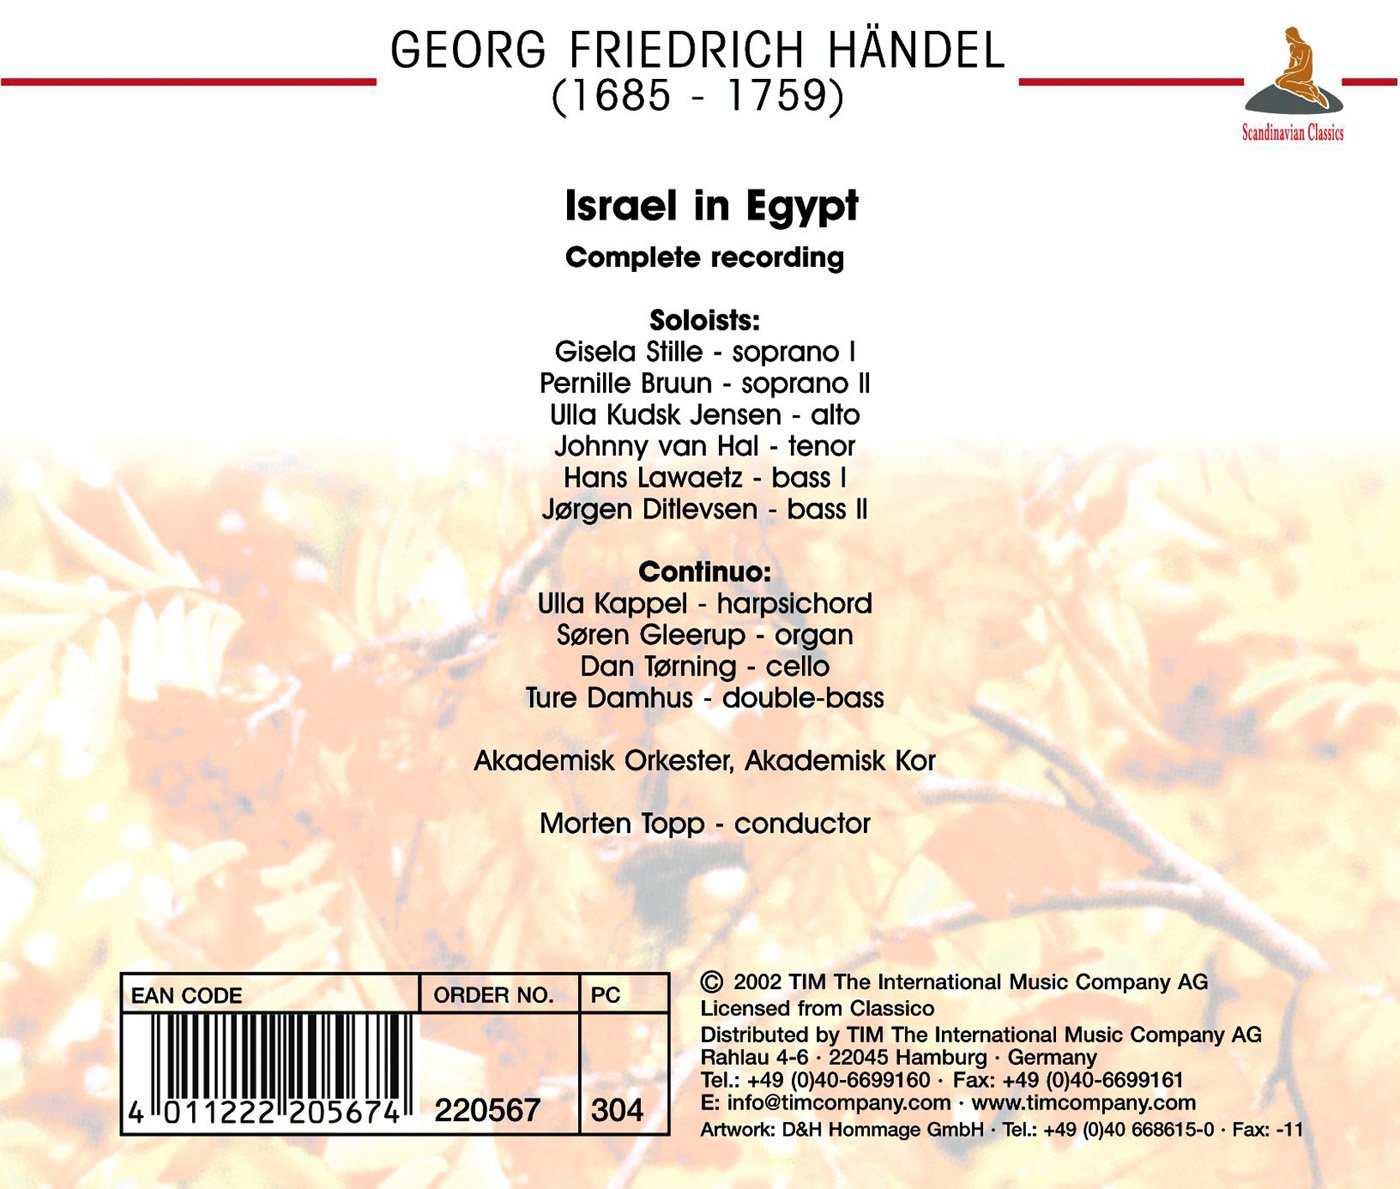 HANDEL: ISRAEL IN EGYPT - Akademisk Orchestra and Choir (2 CDs)